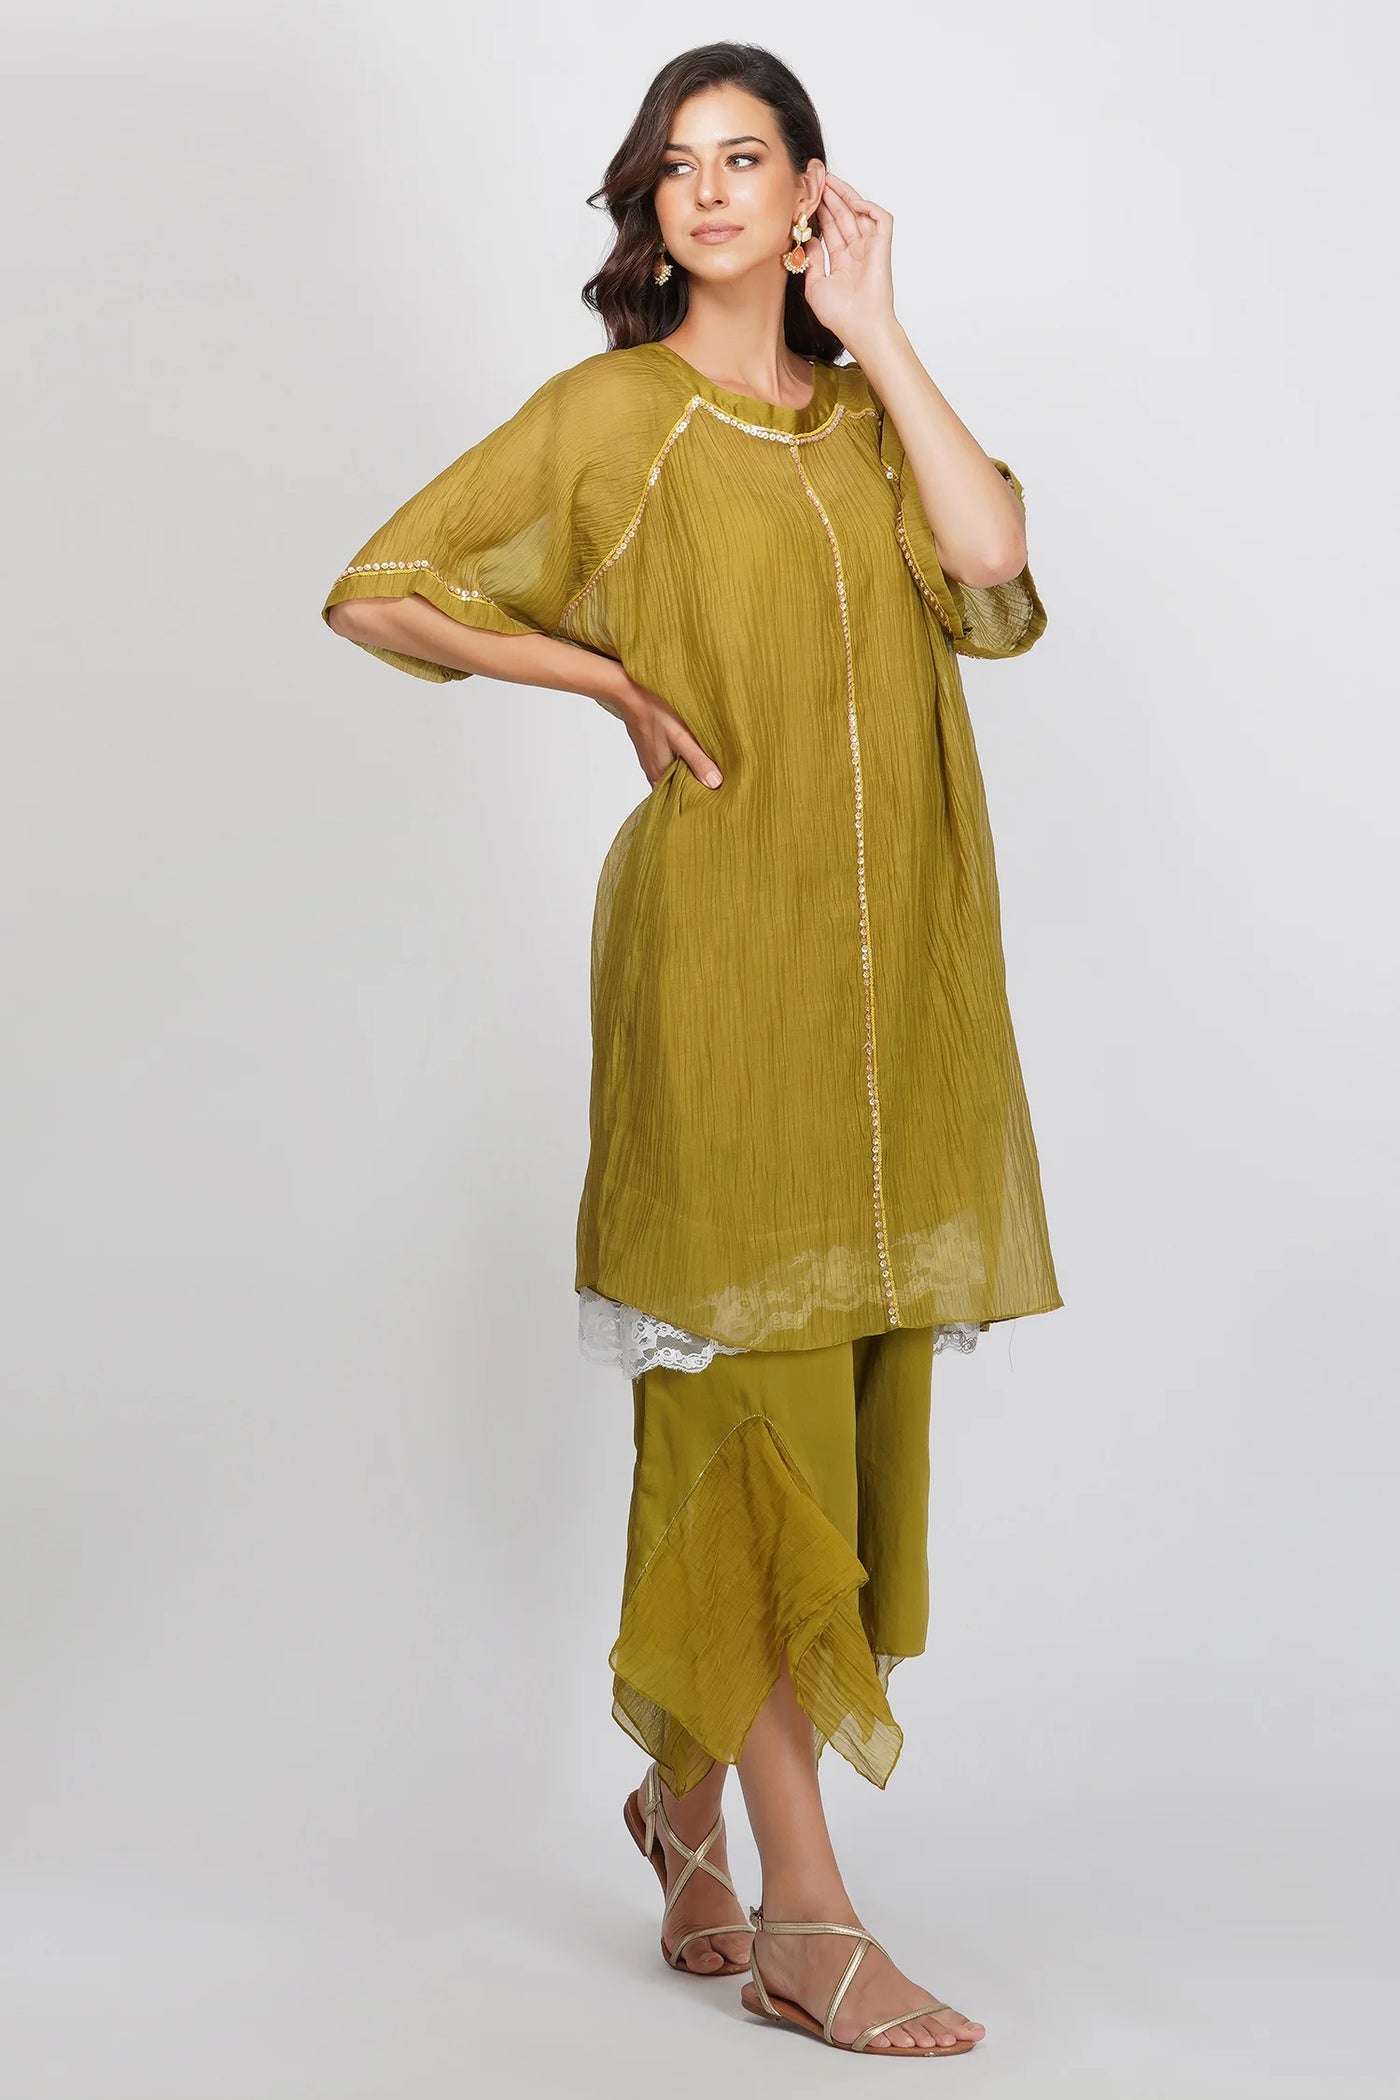 Green Asymmetric Tunic Set - Indian Clothing in Denver, CO, Aurora, CO, Boulder, CO, Fort Collins, CO, Colorado Springs, CO, Parker, CO, Highlands Ranch, CO, Cherry Creek, CO, Centennial, CO, and Longmont, CO. Nationwide shipping USA - India Fashion X